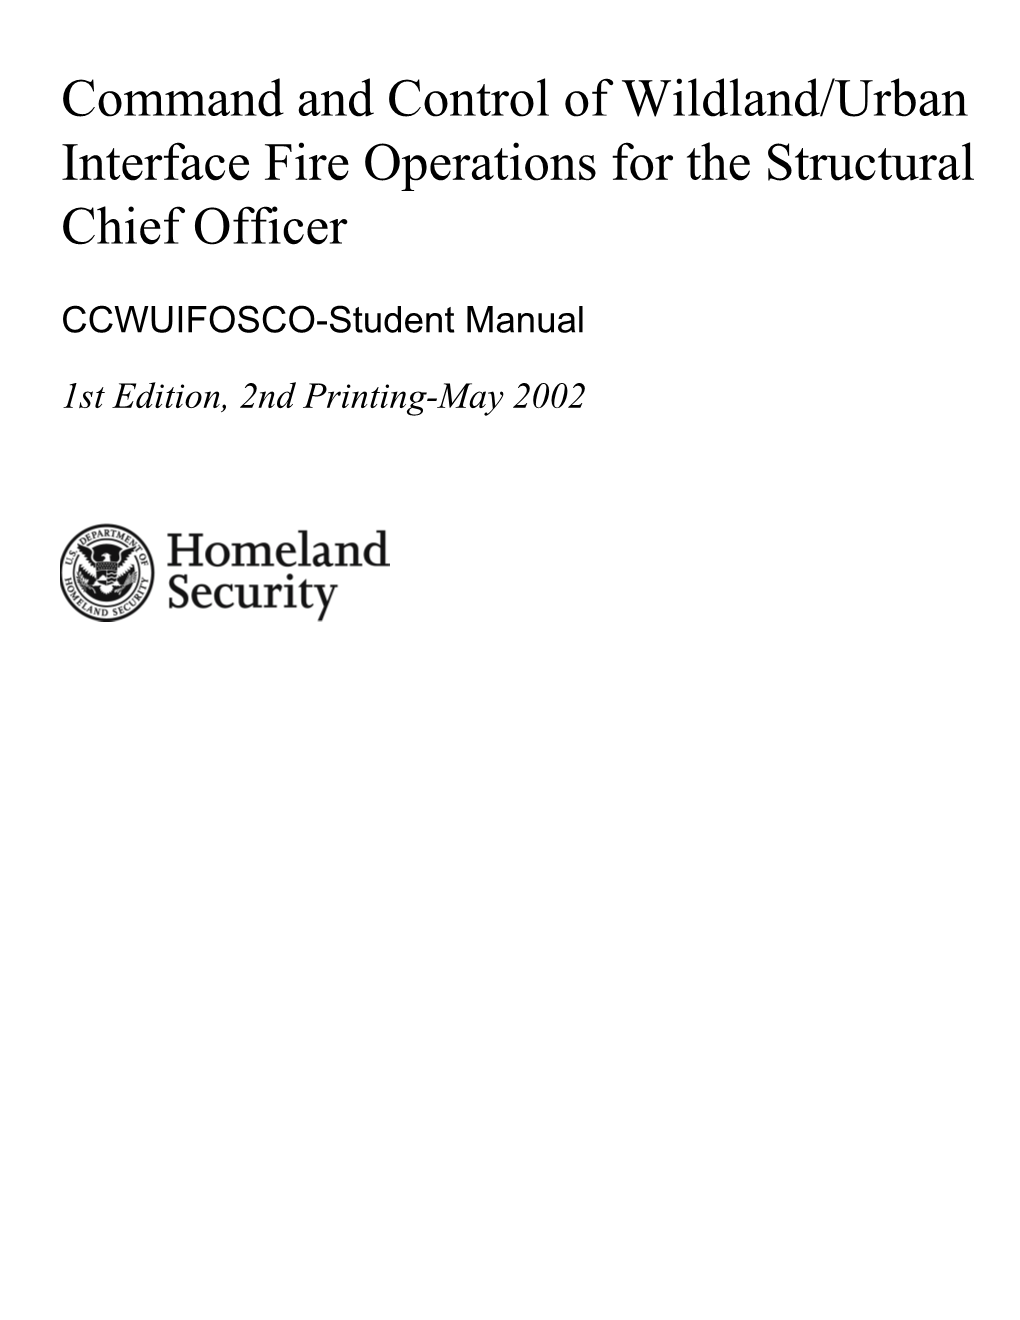 Command and Control of Wildland/Urban Interface Fire Operations for the Structural Chief Officer